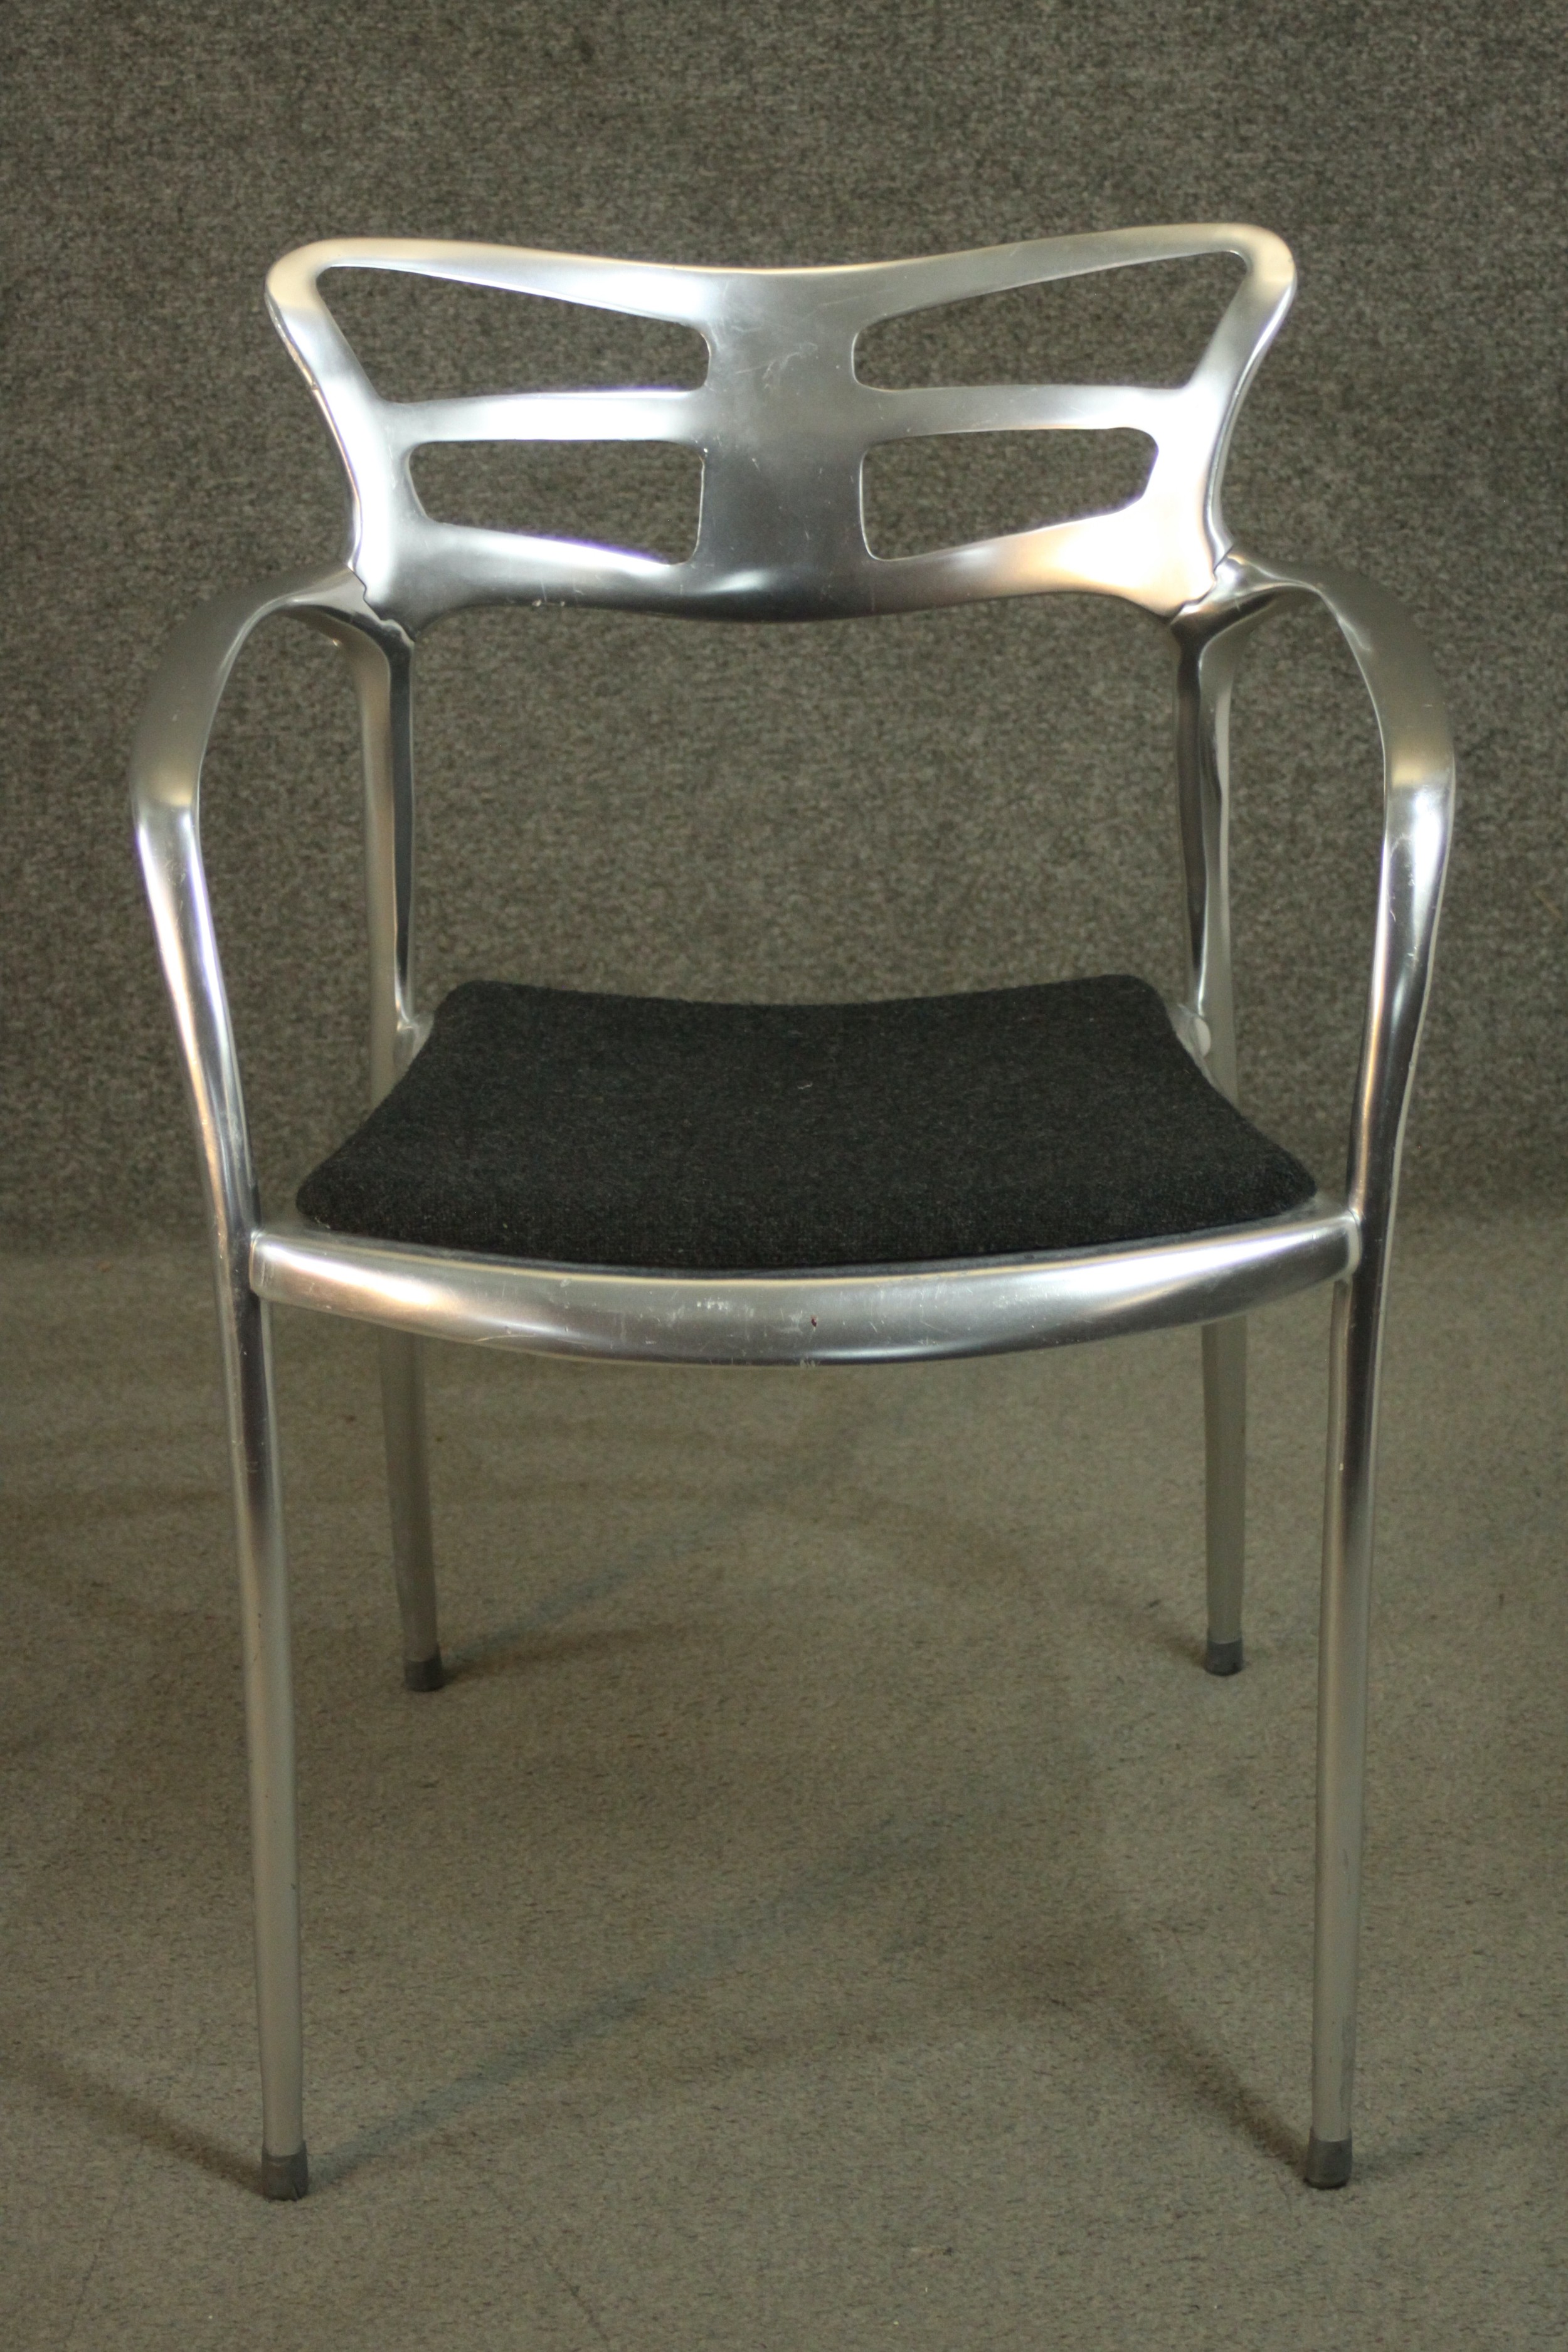 A Liceo chair by Alutec, made from cast aluminum, with open arms, and a dark grey upholstered - Image 6 of 7